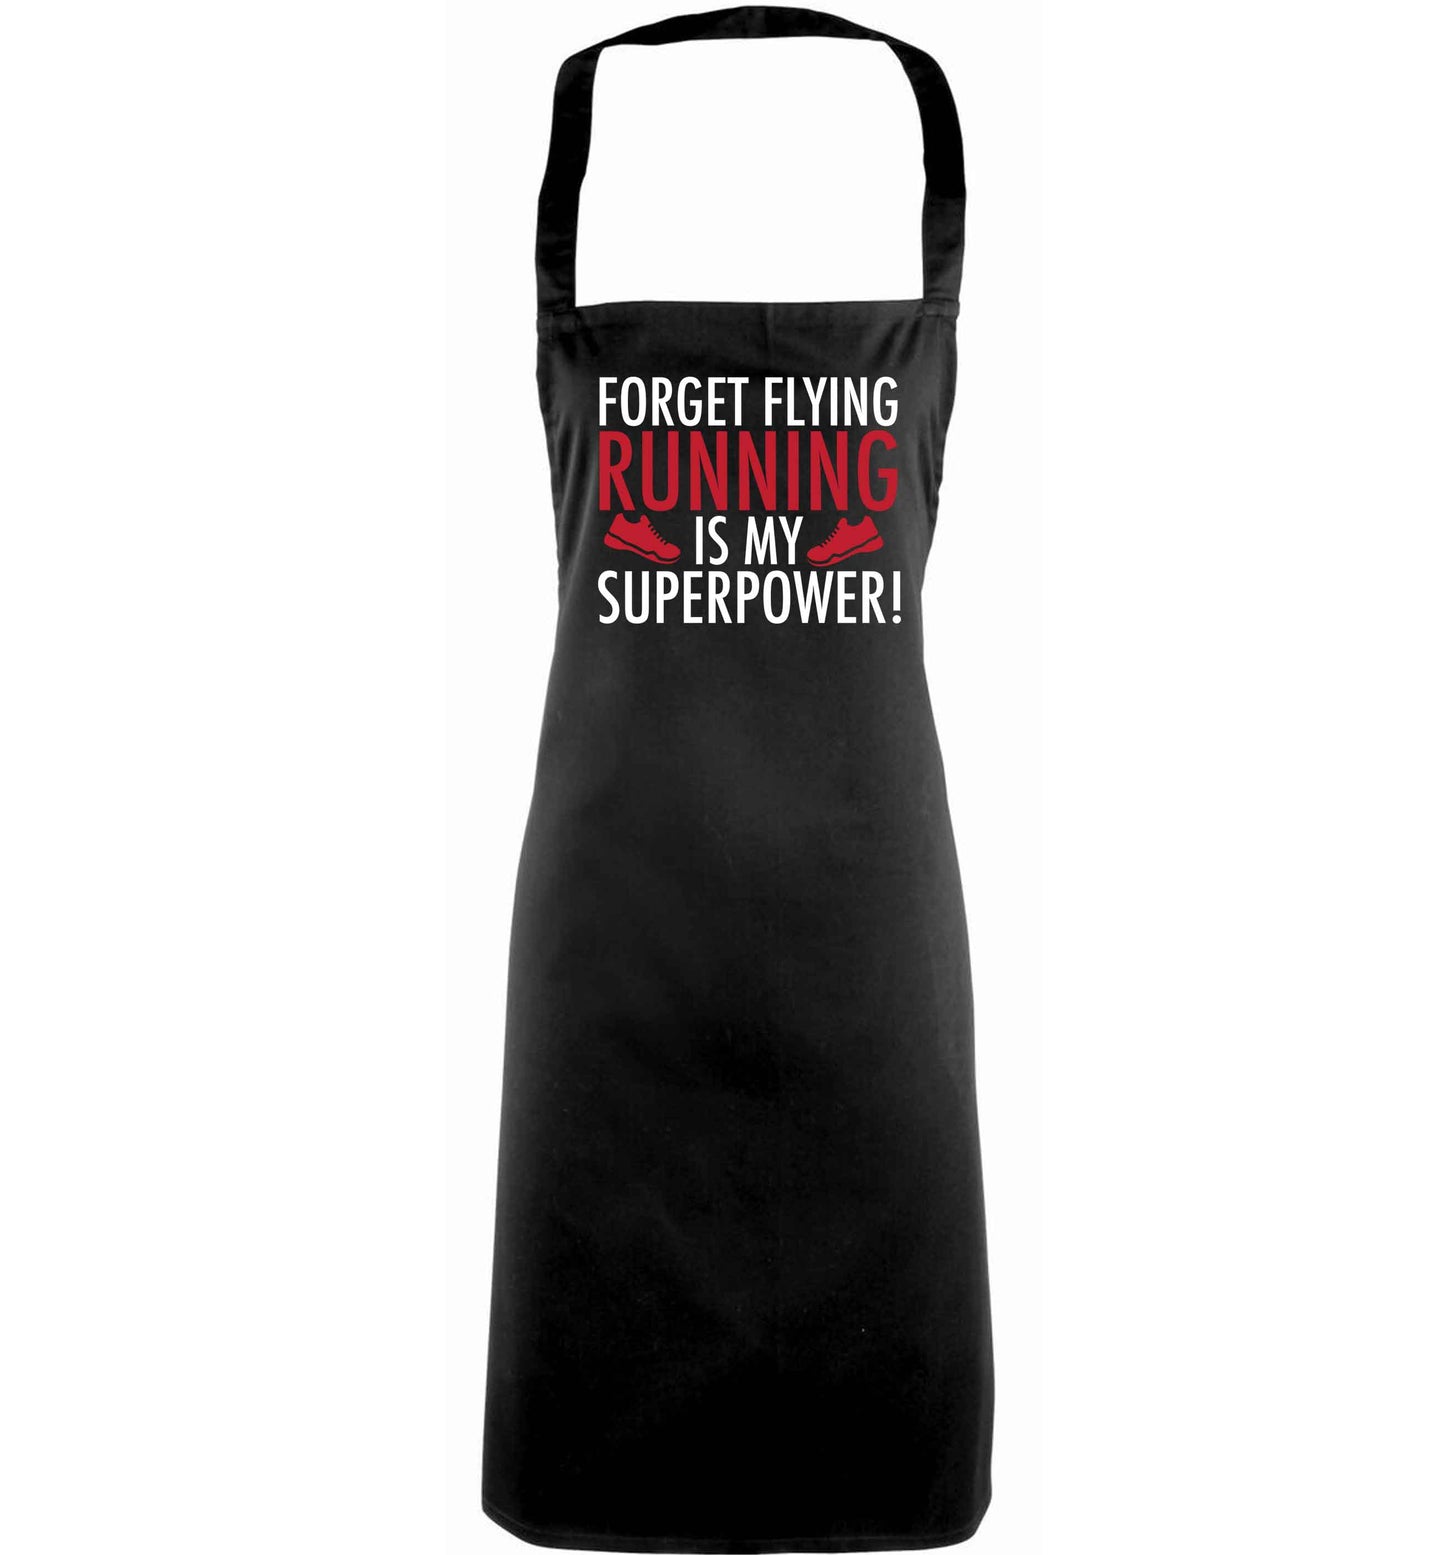 Forget flying running is my superpower adults black apron